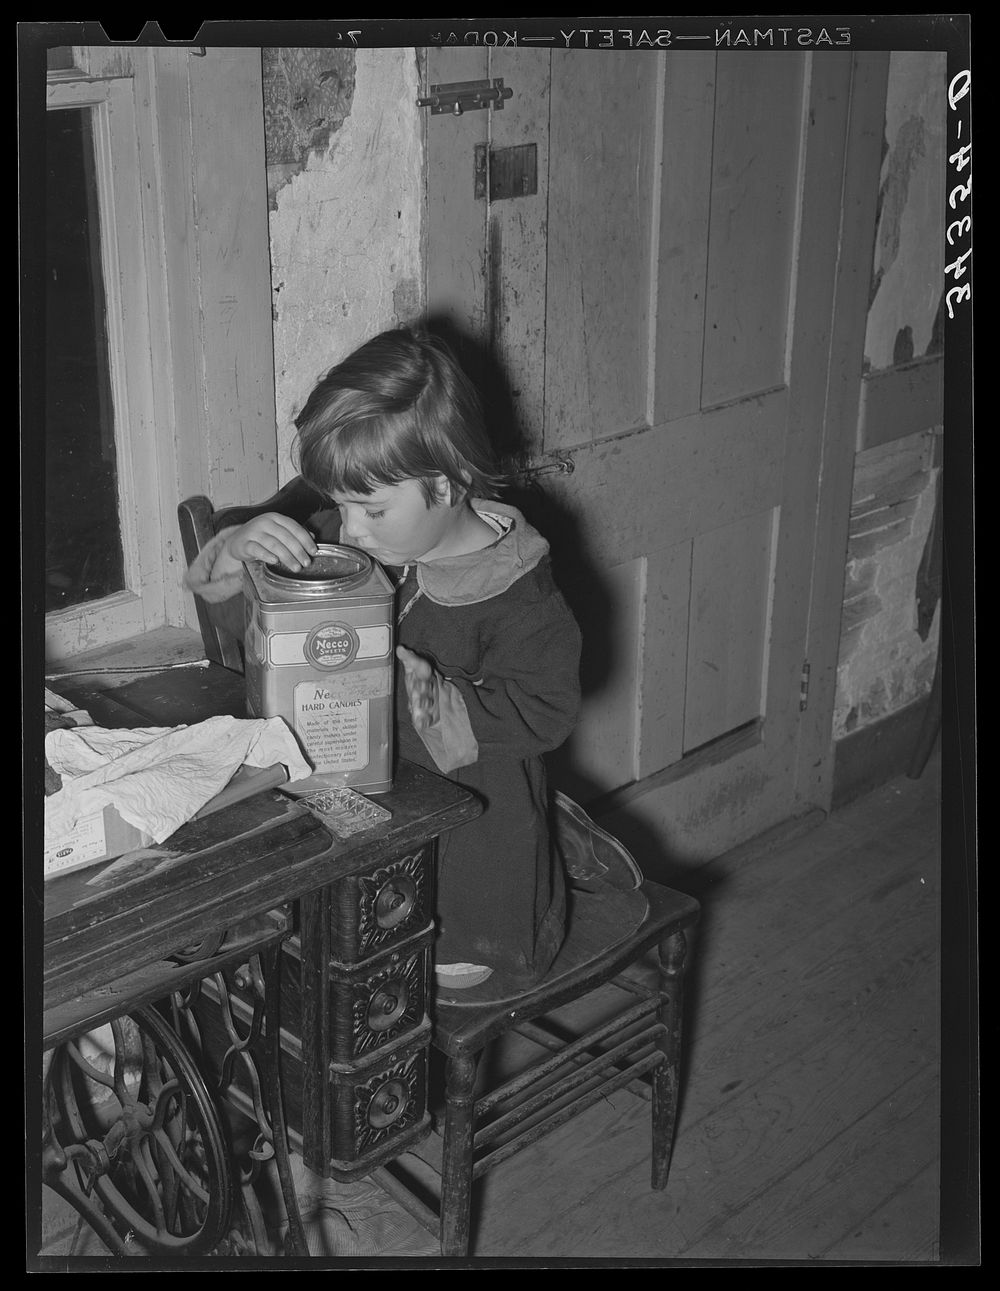 [Untitled photo, possibly related to: Daughter of FSA (Farm Security Administration) client looking into candy jar. Farm…